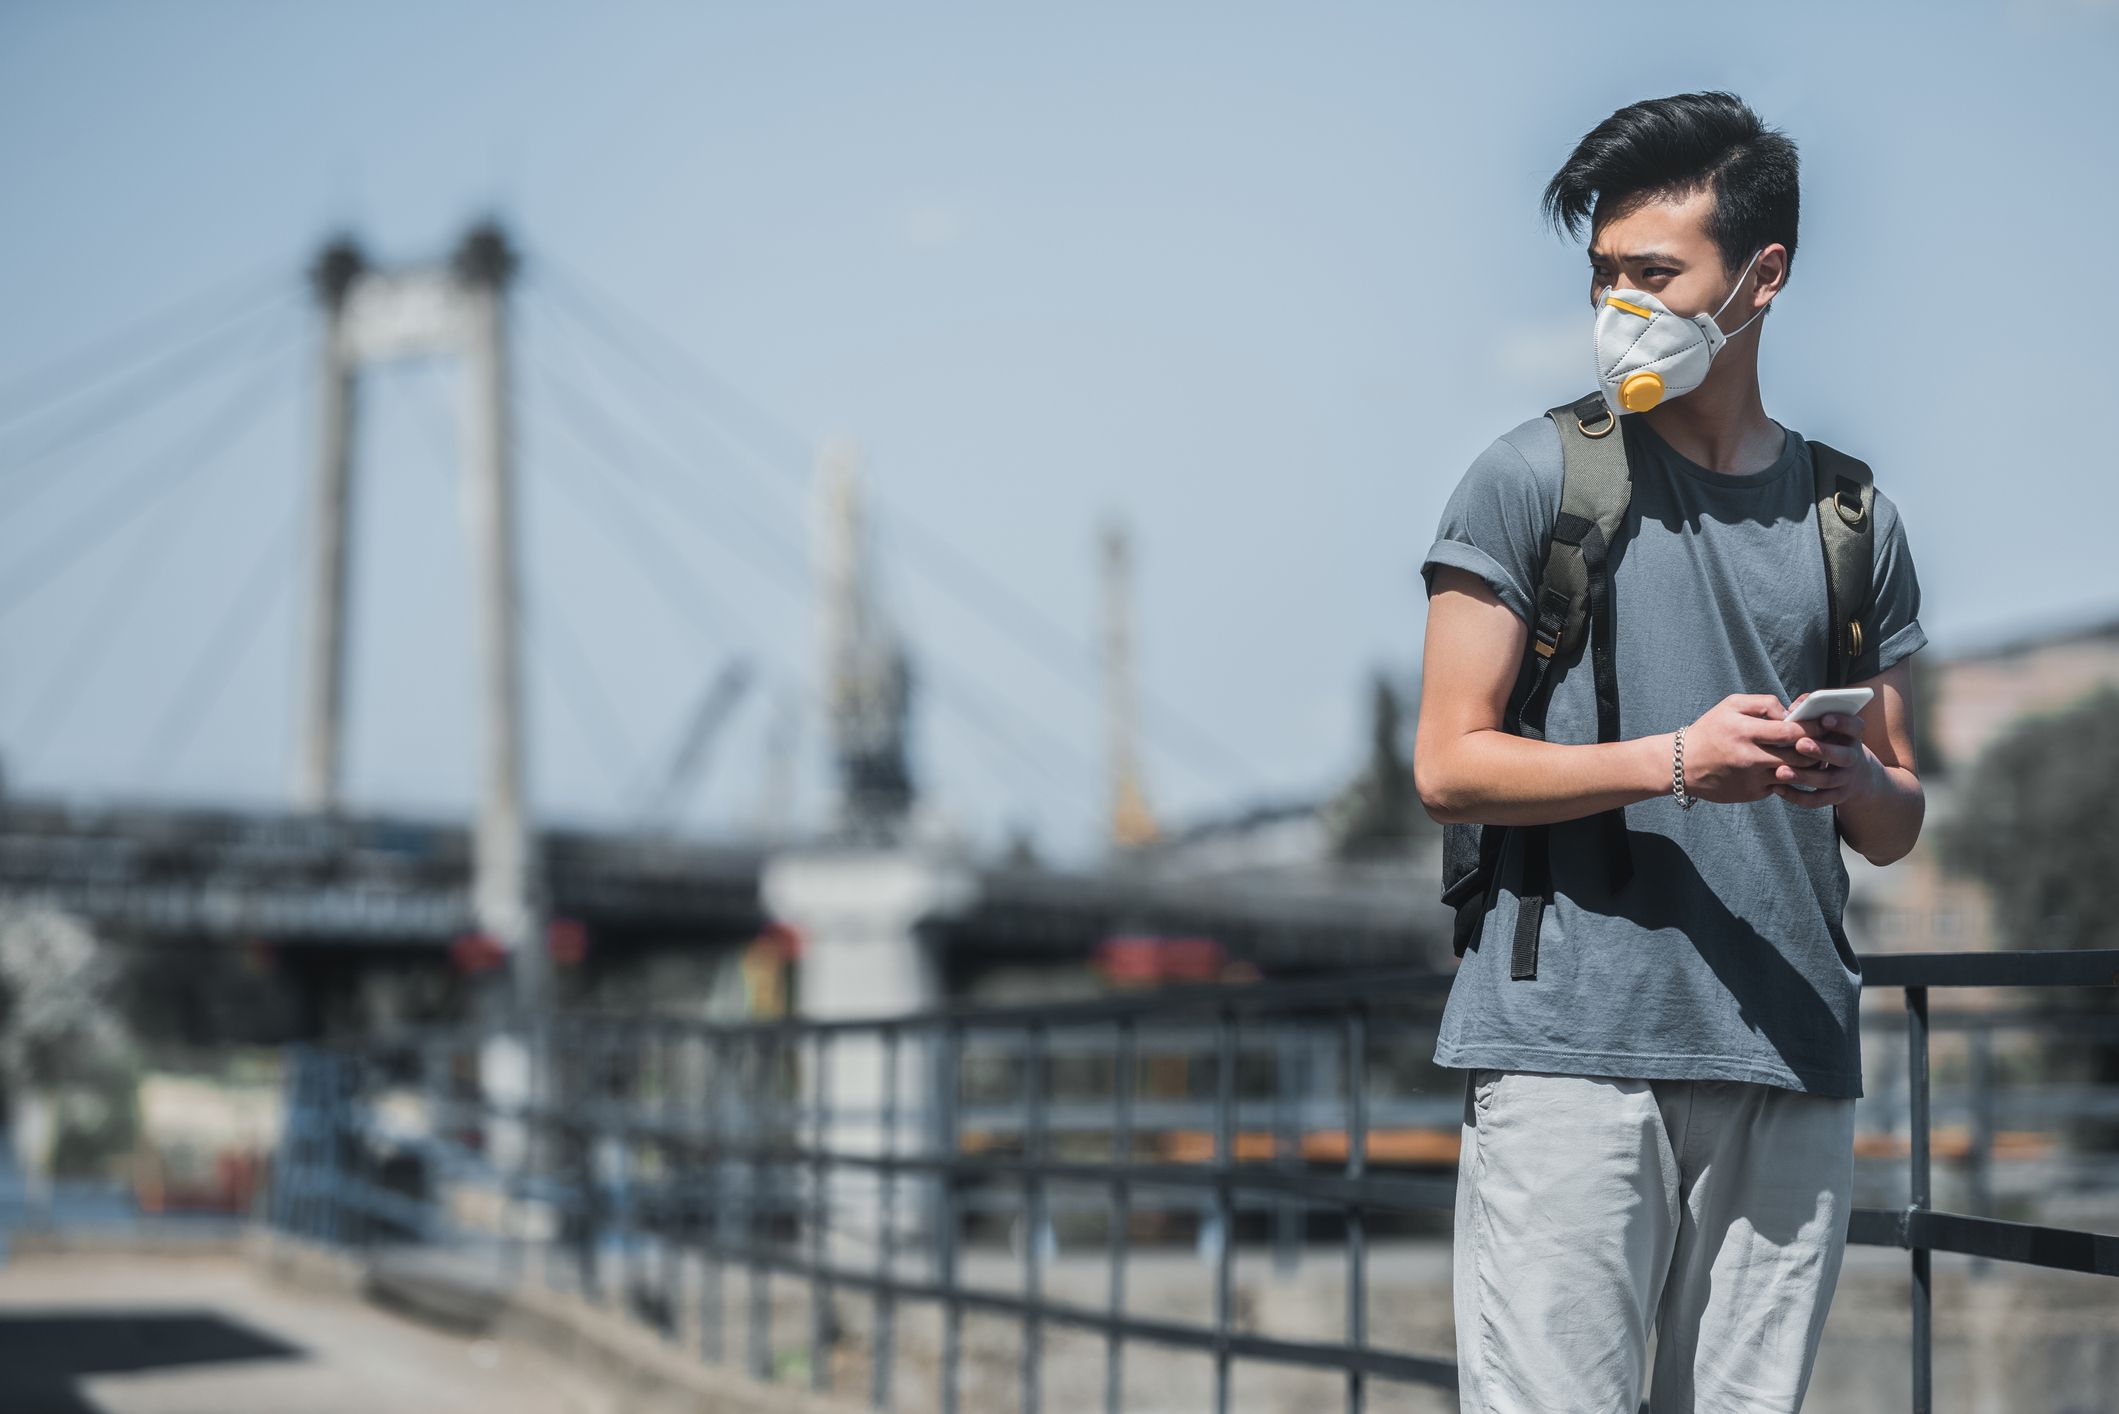 air pollution city teenager getty stock